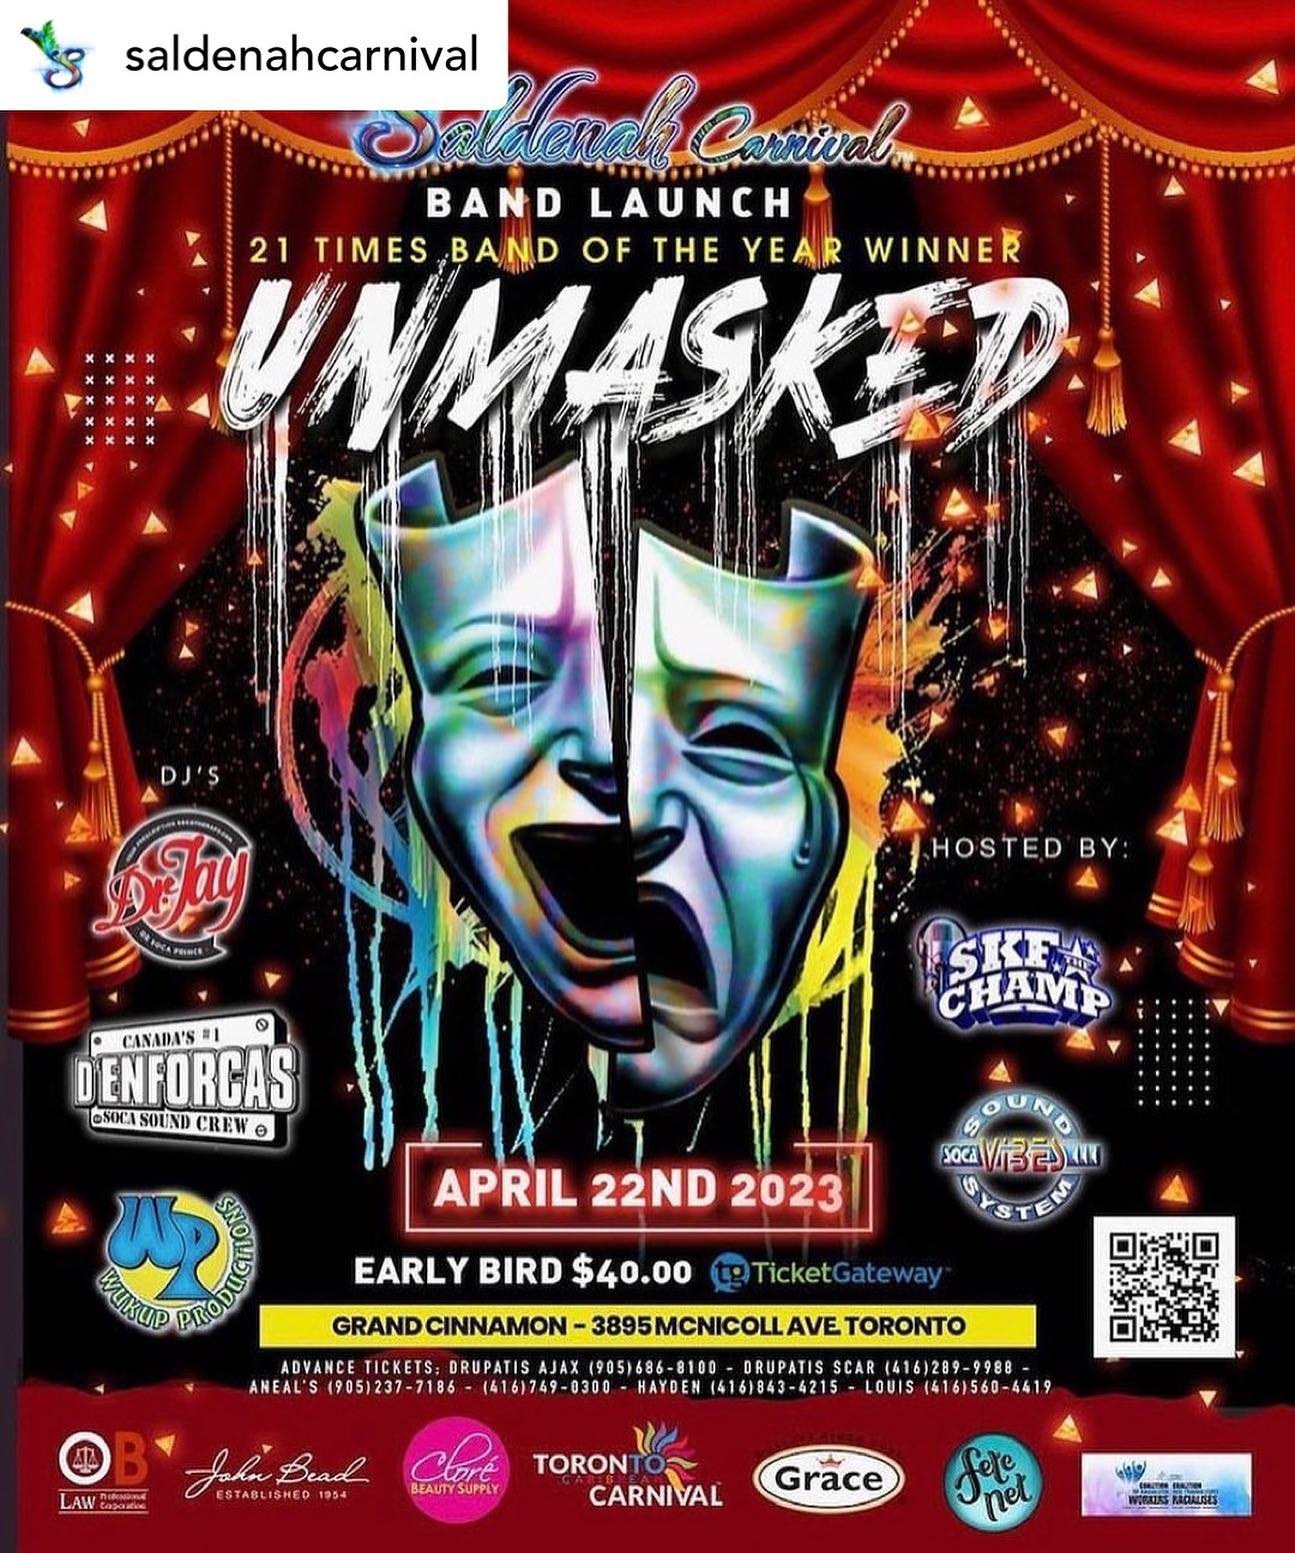 Your defending “BAND OF THE YEAR” champions for #torontocarnival presents
UNMASKED
for 2023!!!.
TORONTO CARIBBEAN CARNIVAL 2023
SALDENAH CARNIVAL BAND LAUNCH
 Saturday April 22nd, 2023
 Grand Cinnamon Banquet & Convention
3895 McNicoll Ave. Scarborough, ON (at Morningside)
Music By:
@socaprince @denforcas & @wukupproductions
Hosted By:
@skfthechamp
@socavibes
 Early Bird Tickets $40
https://www.ticketgateway.com/event/view/unmasked
Aneal's 905-237-7186 & 416-749-0300
Drupati's 905-686-8100 & 416-289-9988
Island Mix Pickering 905-831-1649
Hayden 416-843-4215 & Louis 416-560-4419